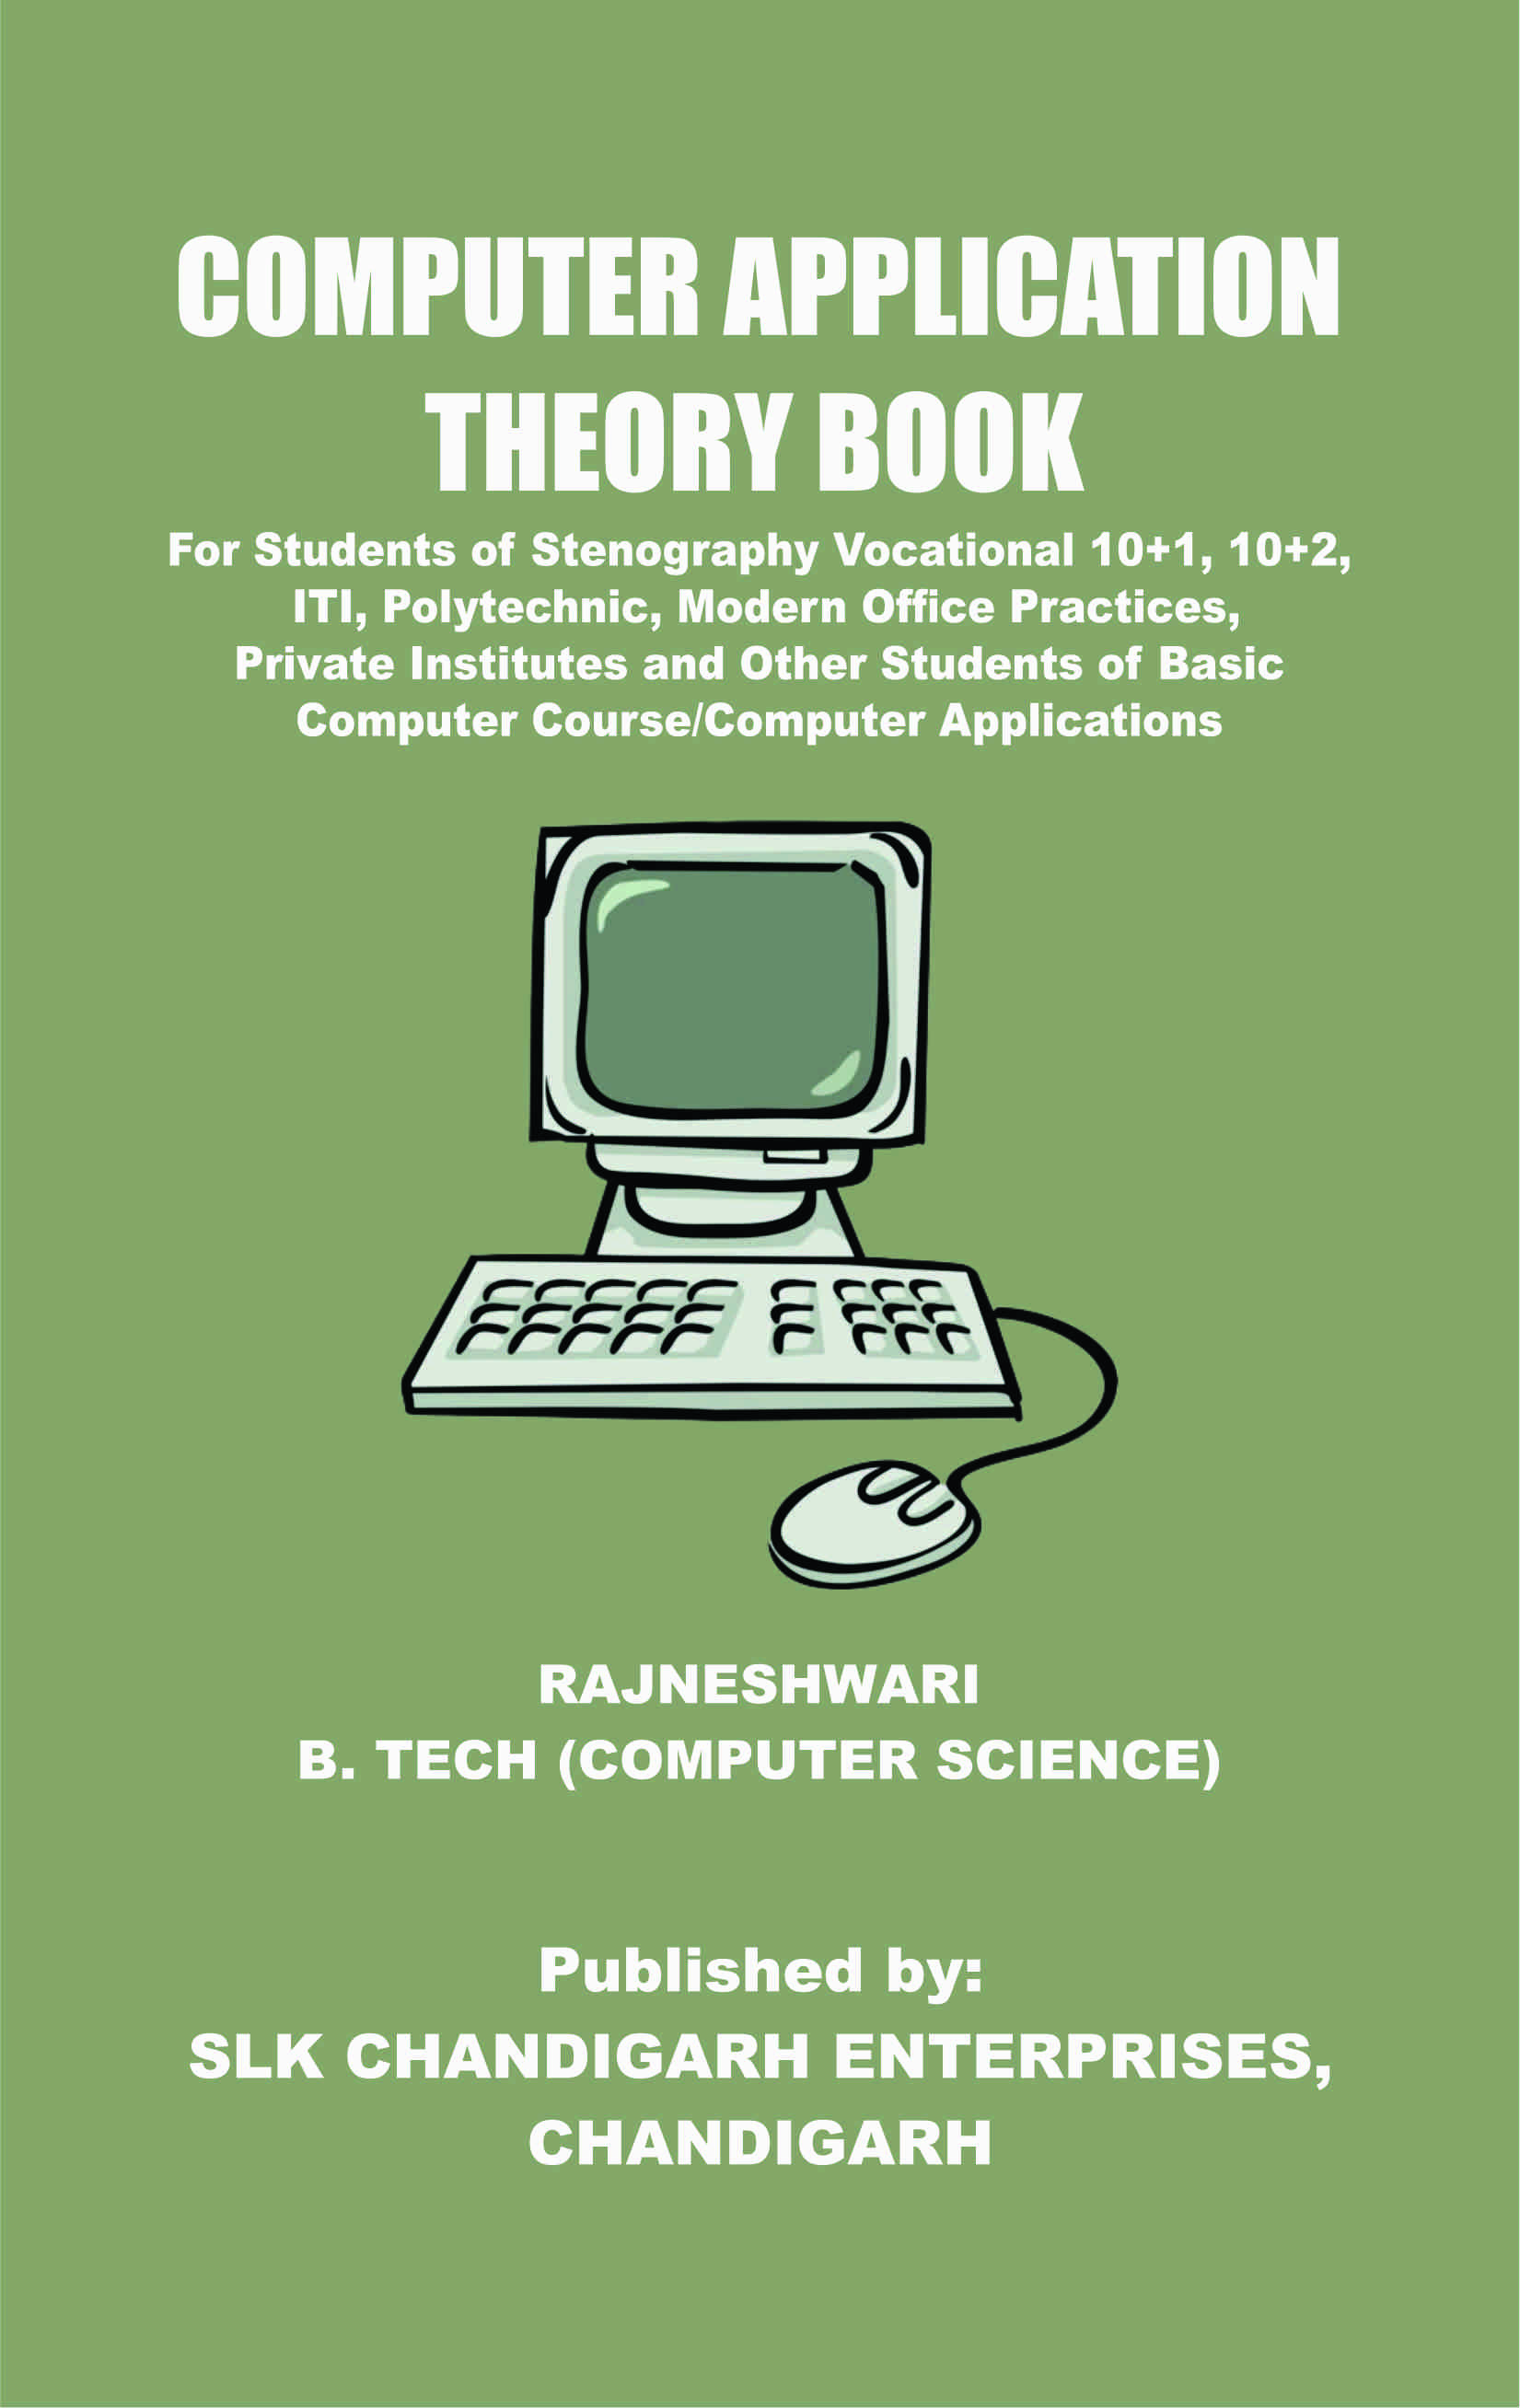 4. Computer Applicatoin Theory Book (1)